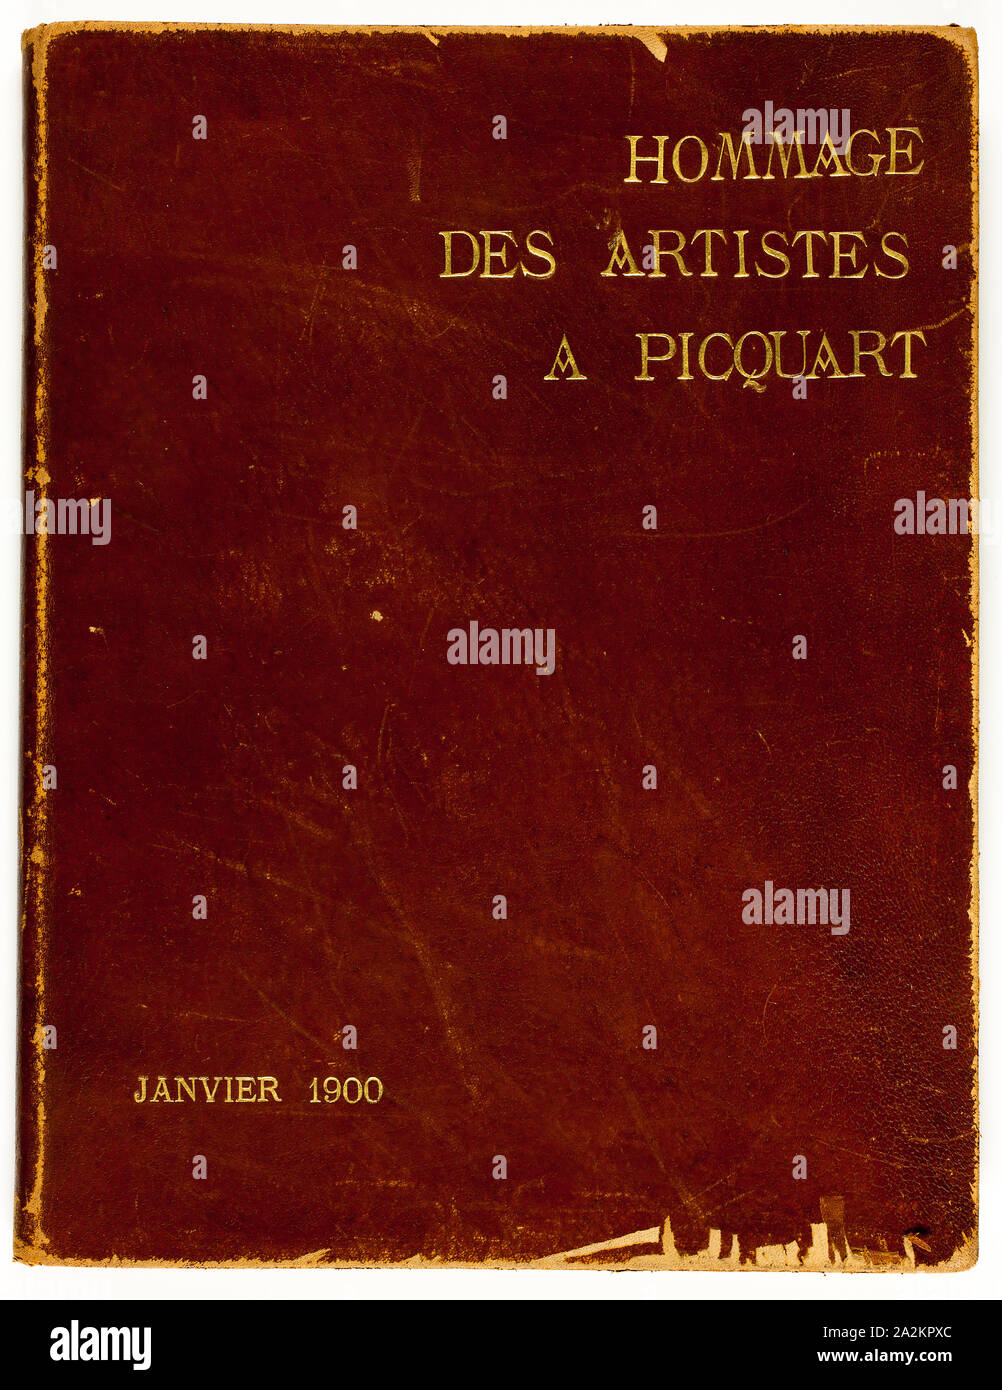 Hommage des artistes à Picquart, 1899, Lithographs by Pierre Émile Cornillier (French, 19th century), Lucien Perroudon (French, 19th century), Louis Anquetin (French, 1861–1932), Adolphe Ernest Gumery (French, 1861–1943), Herman René Georges Paul (French, 19th century), Maximilien Luce (French, 1858–1941), George Manzana-Pissarro (French, 1871–1961), Hippolyte Petitjean (French, 1854–1929), Louis Armand Rault (French, 19th century), Théo van Rysselberghe (Belgian, 1862–1926), Joaquim Sunyer y Miró (Spanish, 1875–1956), and Félix Edouard Vallotton (French, born Switzerland, 1865–1925 Stock Photo